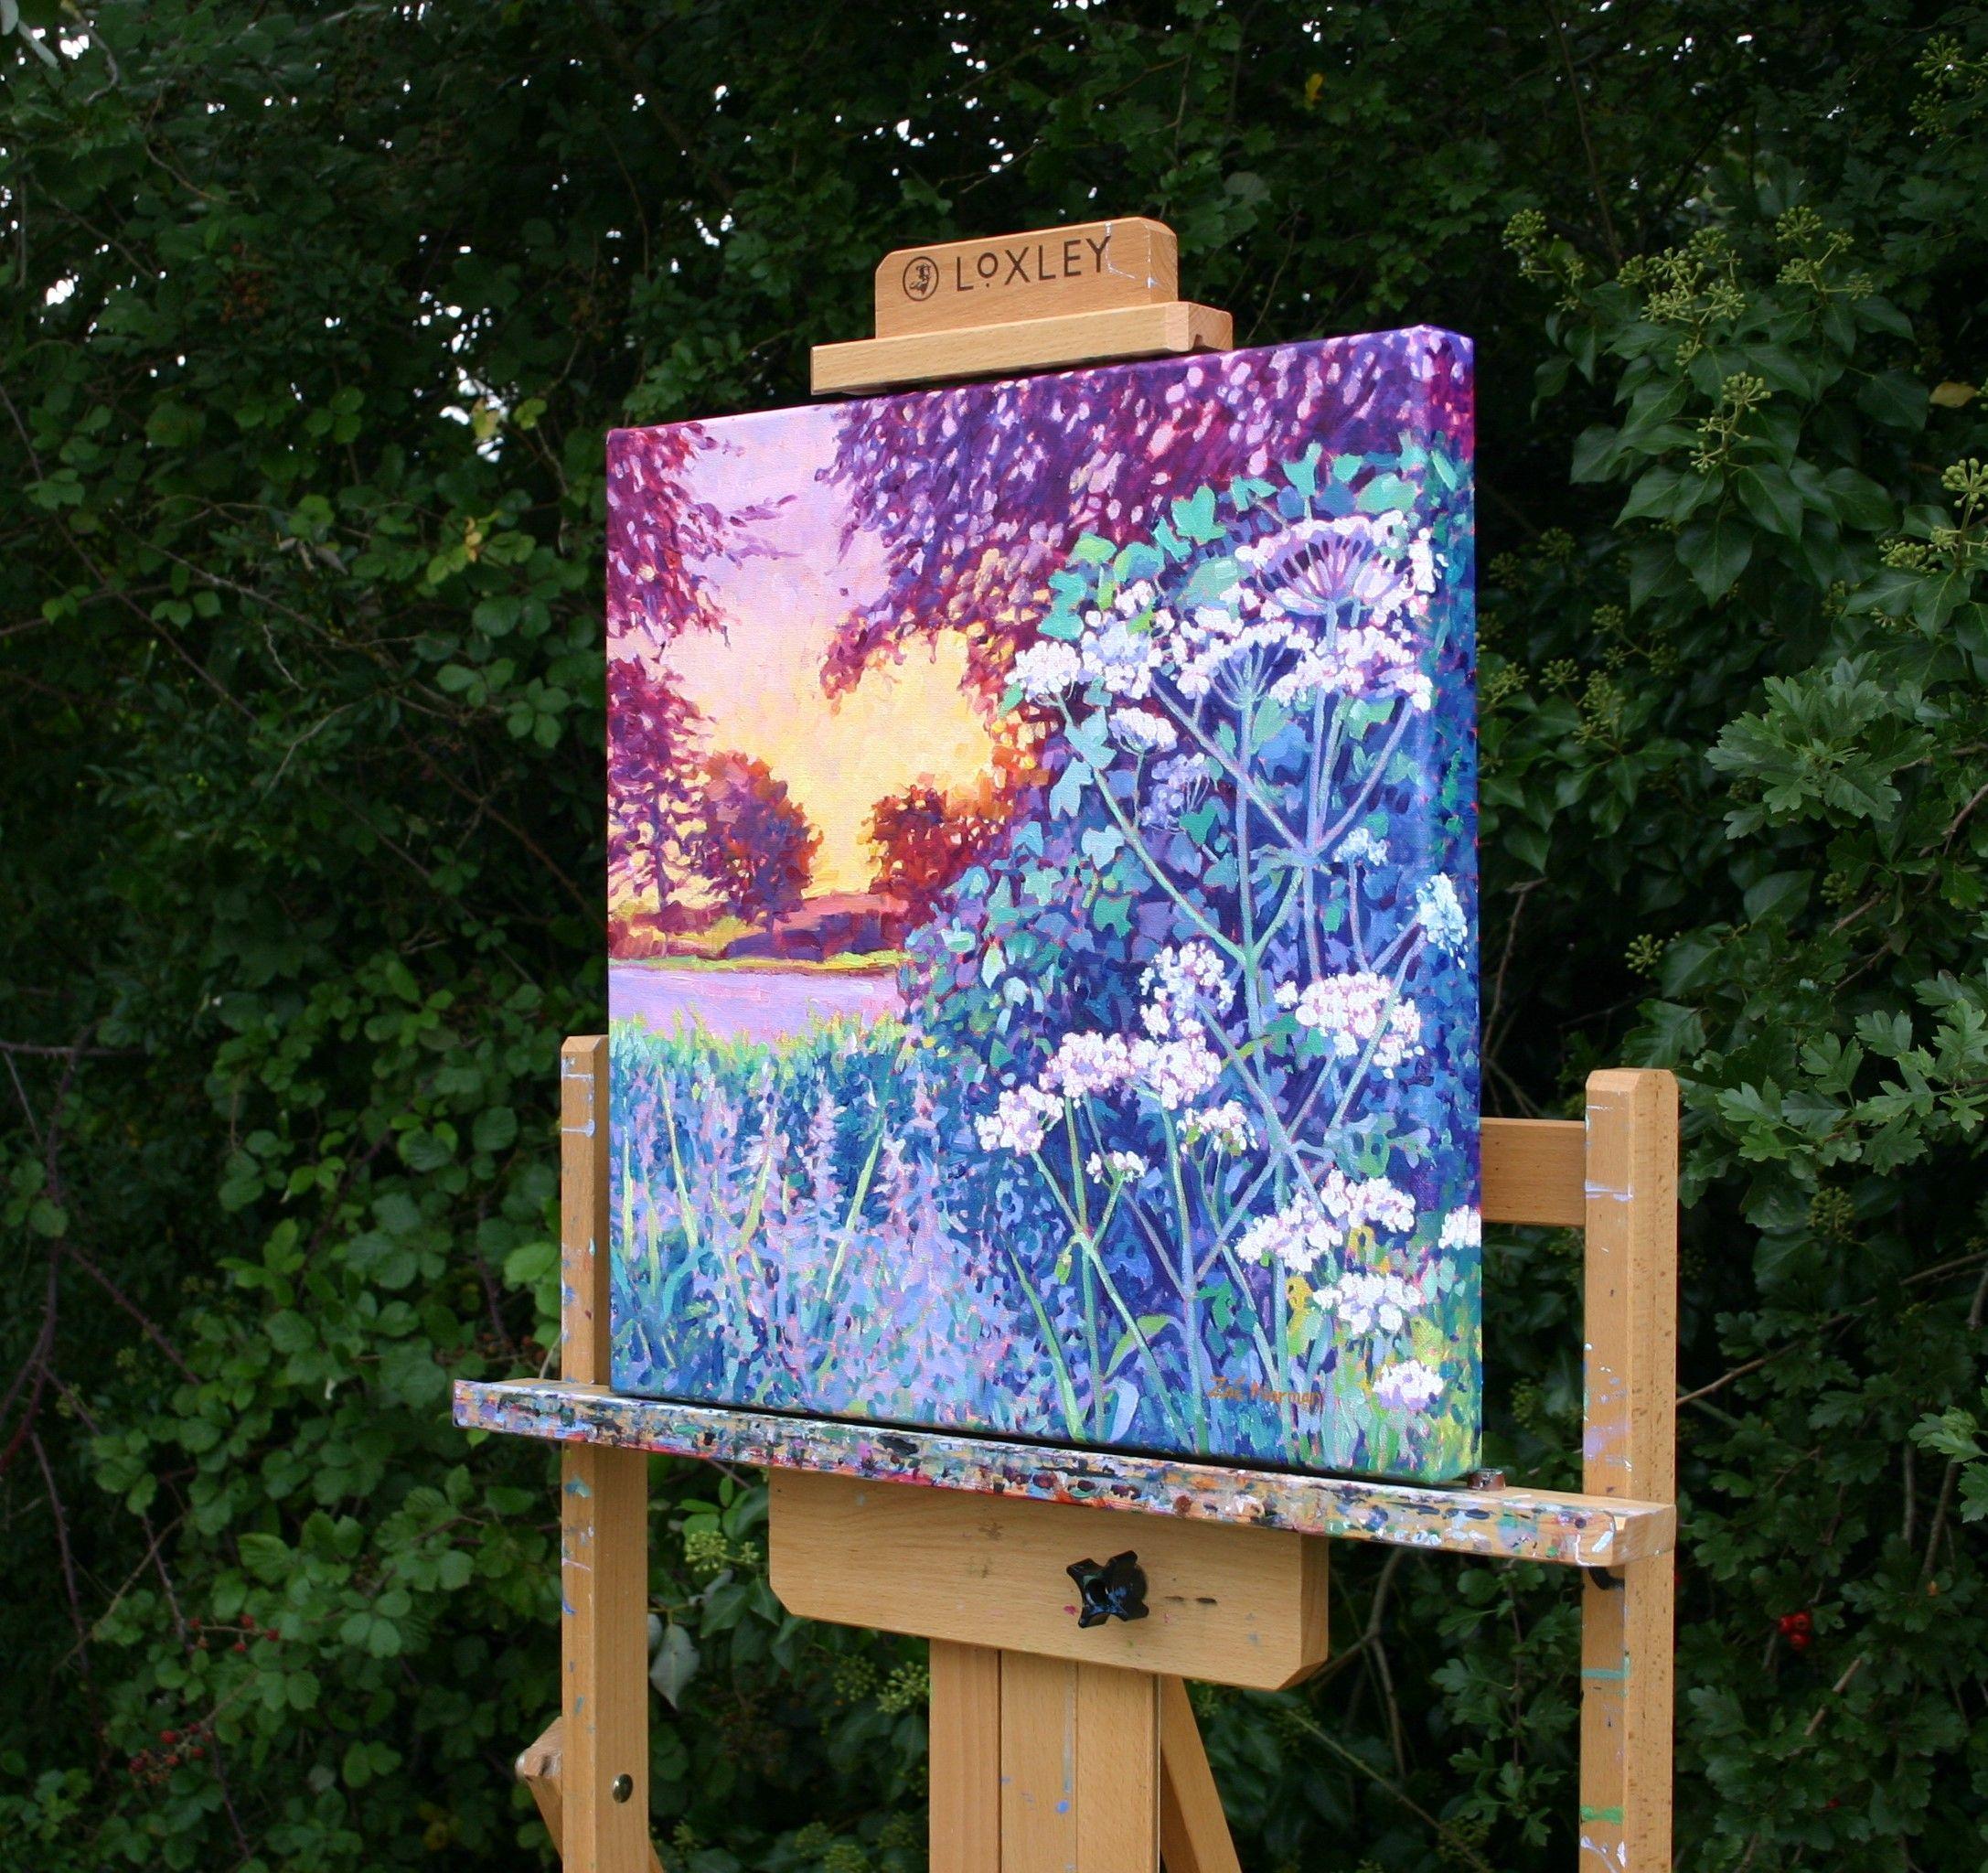 Contemporary Impressionism    An evening walk inspired this painting. The lovely blue green and violet hues of the foreground cow parsley and grasses offset the hazy burnt yellow and orange glow of the sun through the distant trees.    This